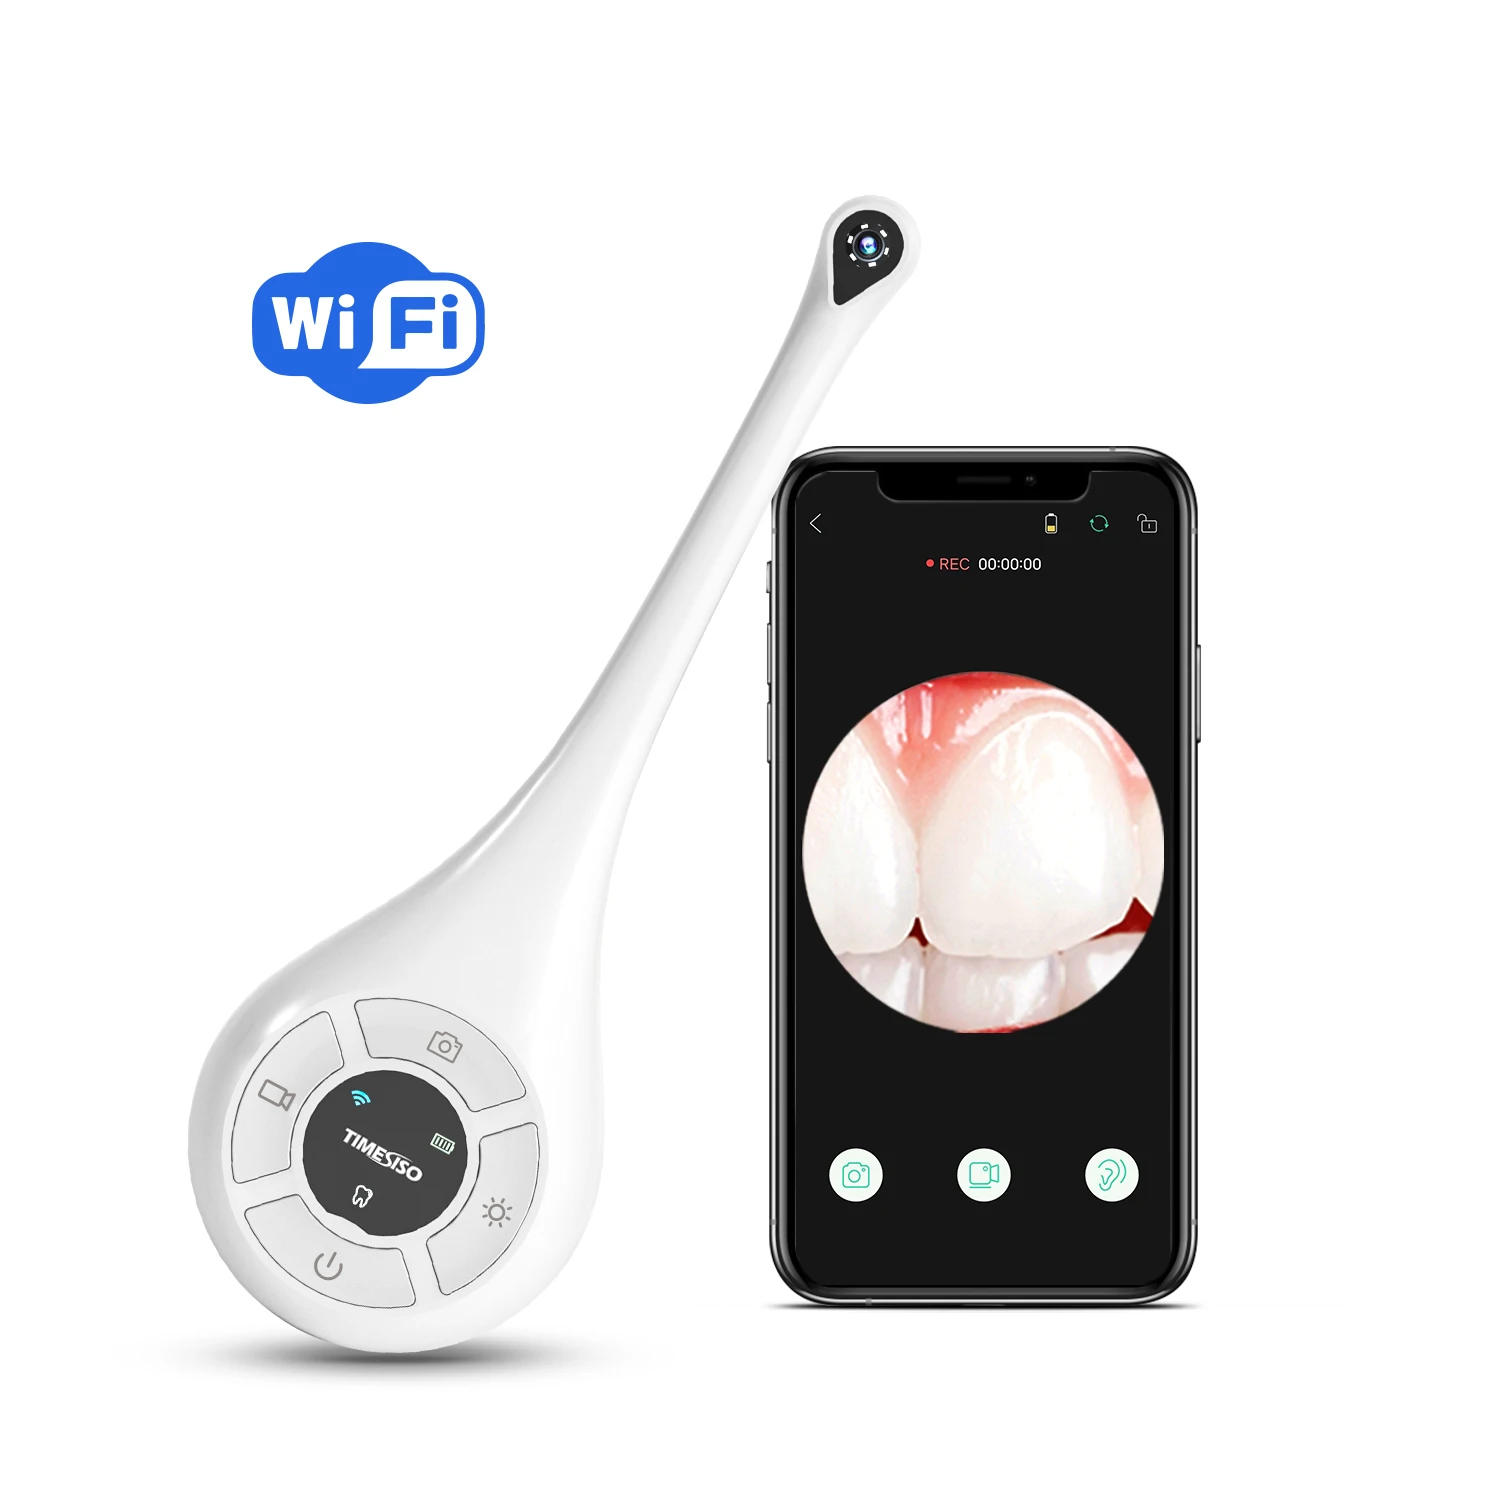 

Intraoral Endoscope WiFi 1080P HD Wireless Dental Camera Teeth Inspection Borescope 8 LEDs Split Design Support for iOS Android